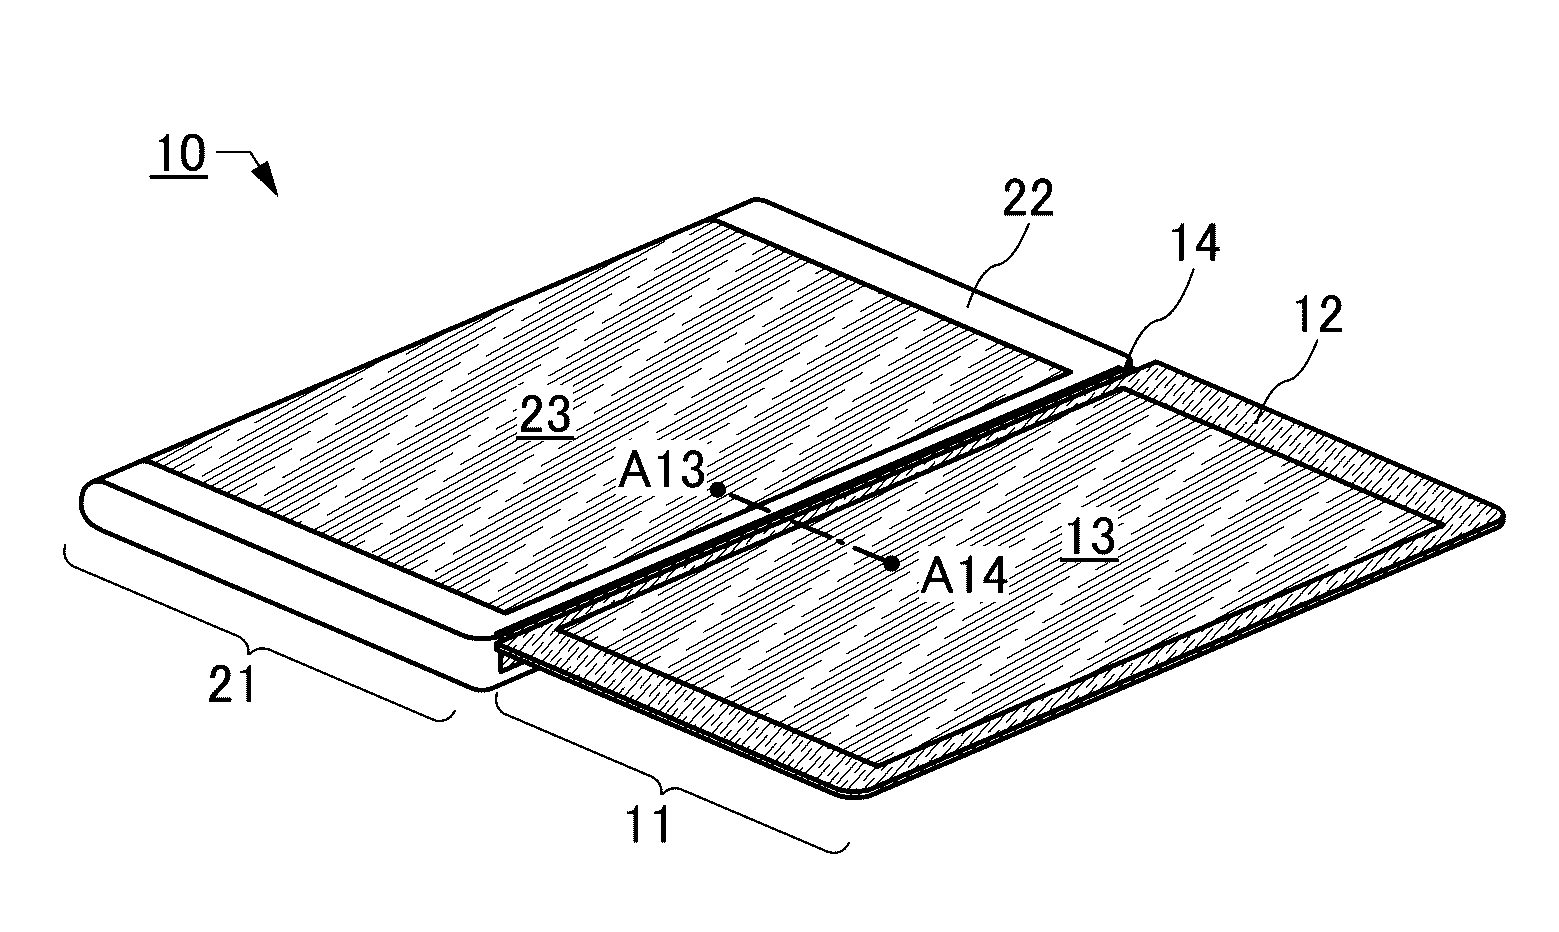 Display device, electronic device, and system